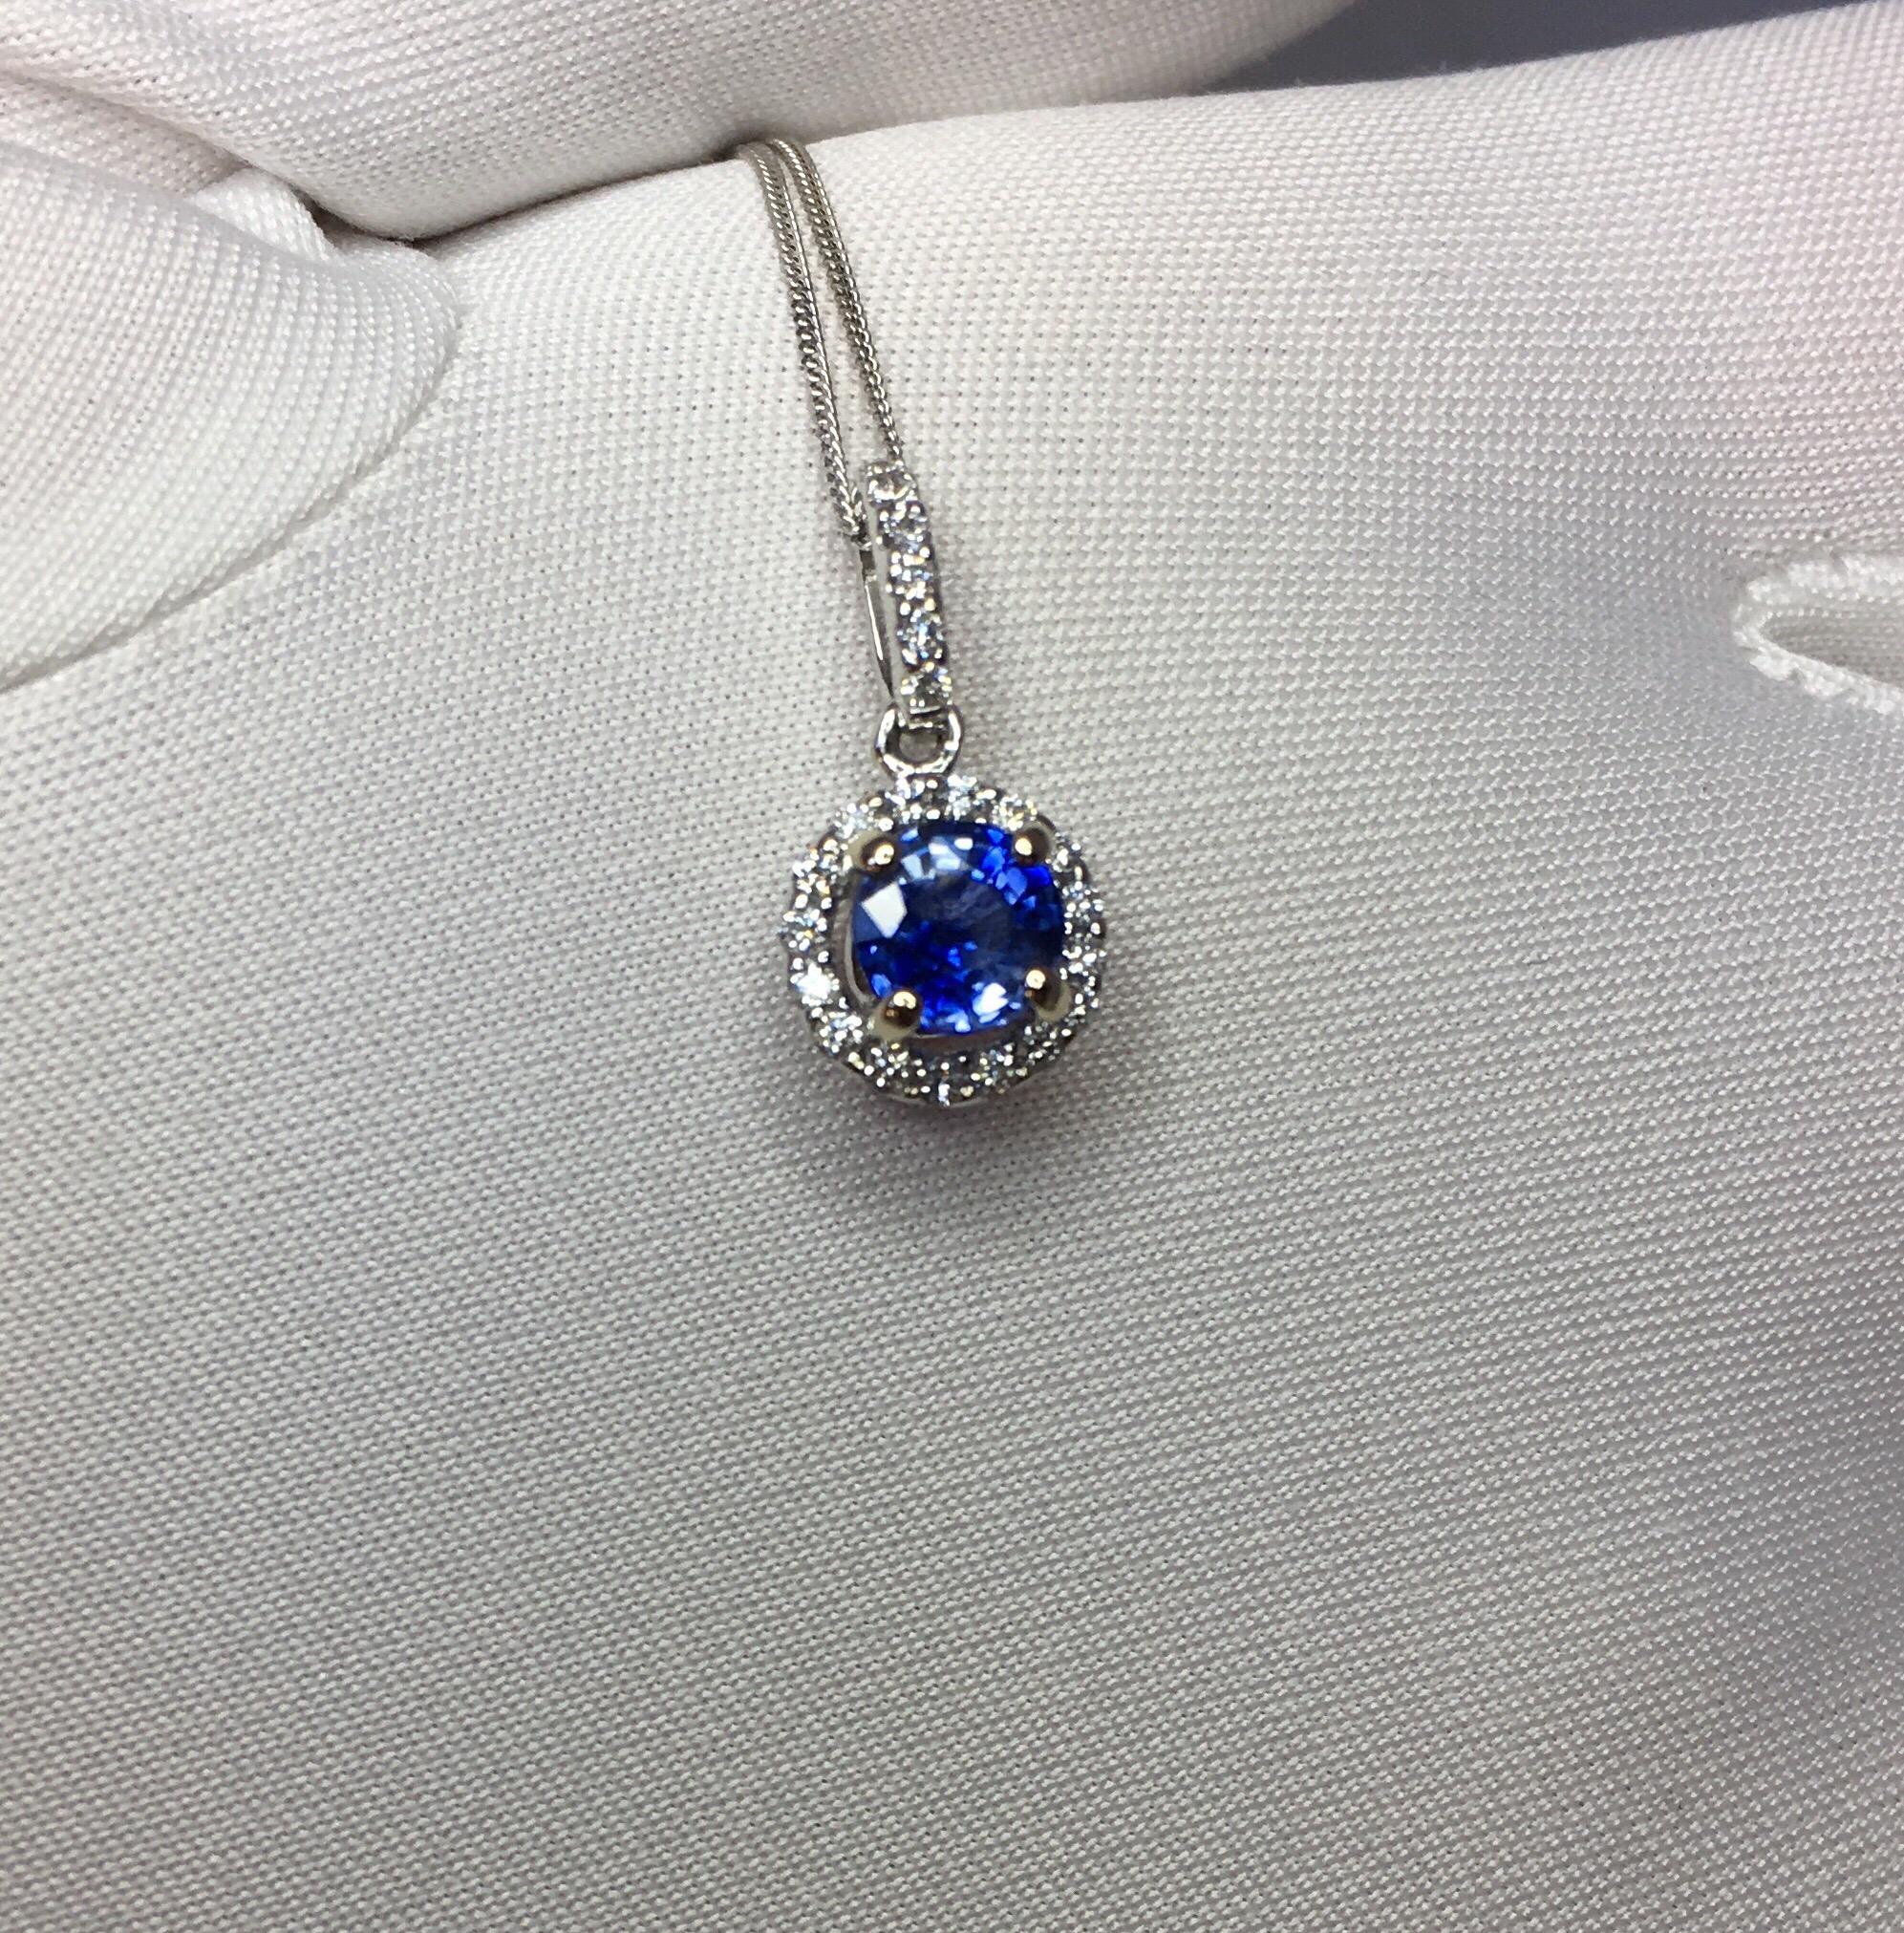 Stunning natural vivid blue Ceylon sapphire set in a fine 18k white gold diamond cluster Pendant. 

0.60 carat centre sapphire with stunning blue colour and very good clarity.
Ceylon in origin, source of some of the worlds best quality